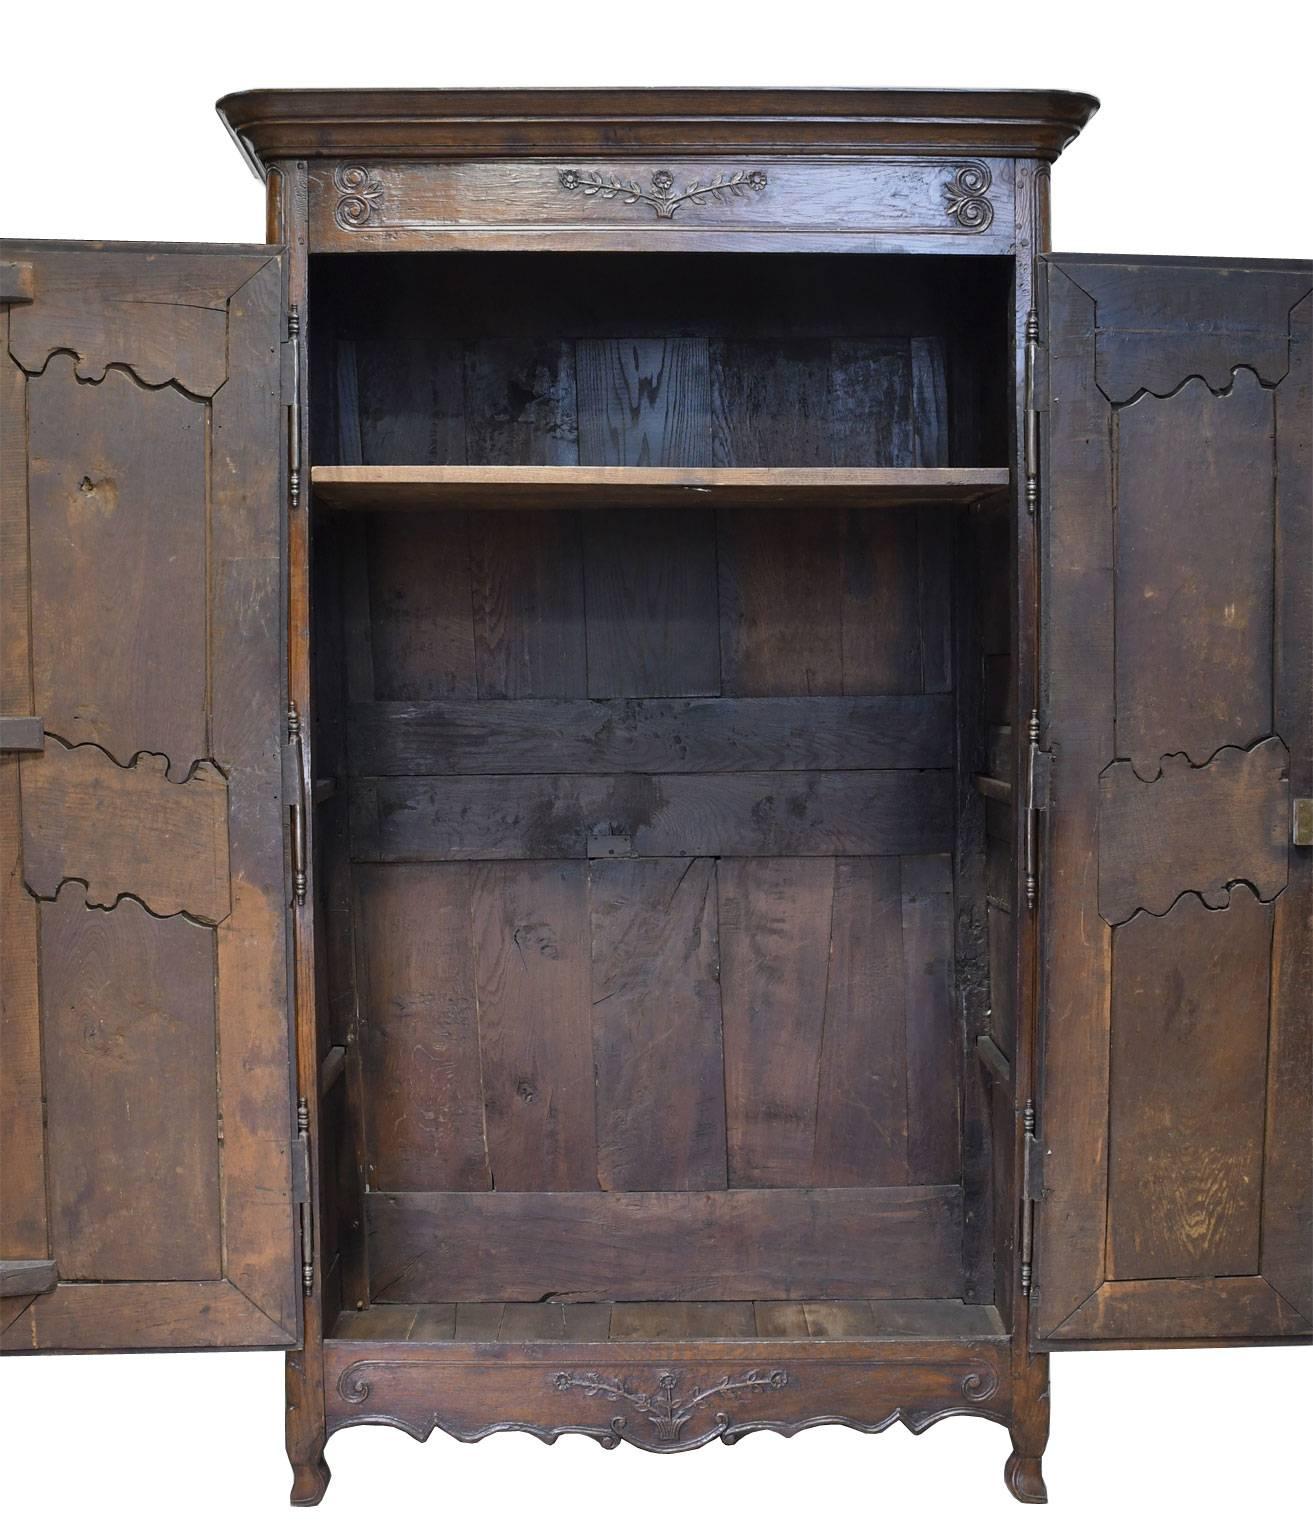 A lovely French armoire in oak with carved foliate and floral decorative elements on doors, crest and apron. Mortice and tenon construction with wooden pegs, befitting the period. Oak has a rich dark patina, with carvings the result of a reduction